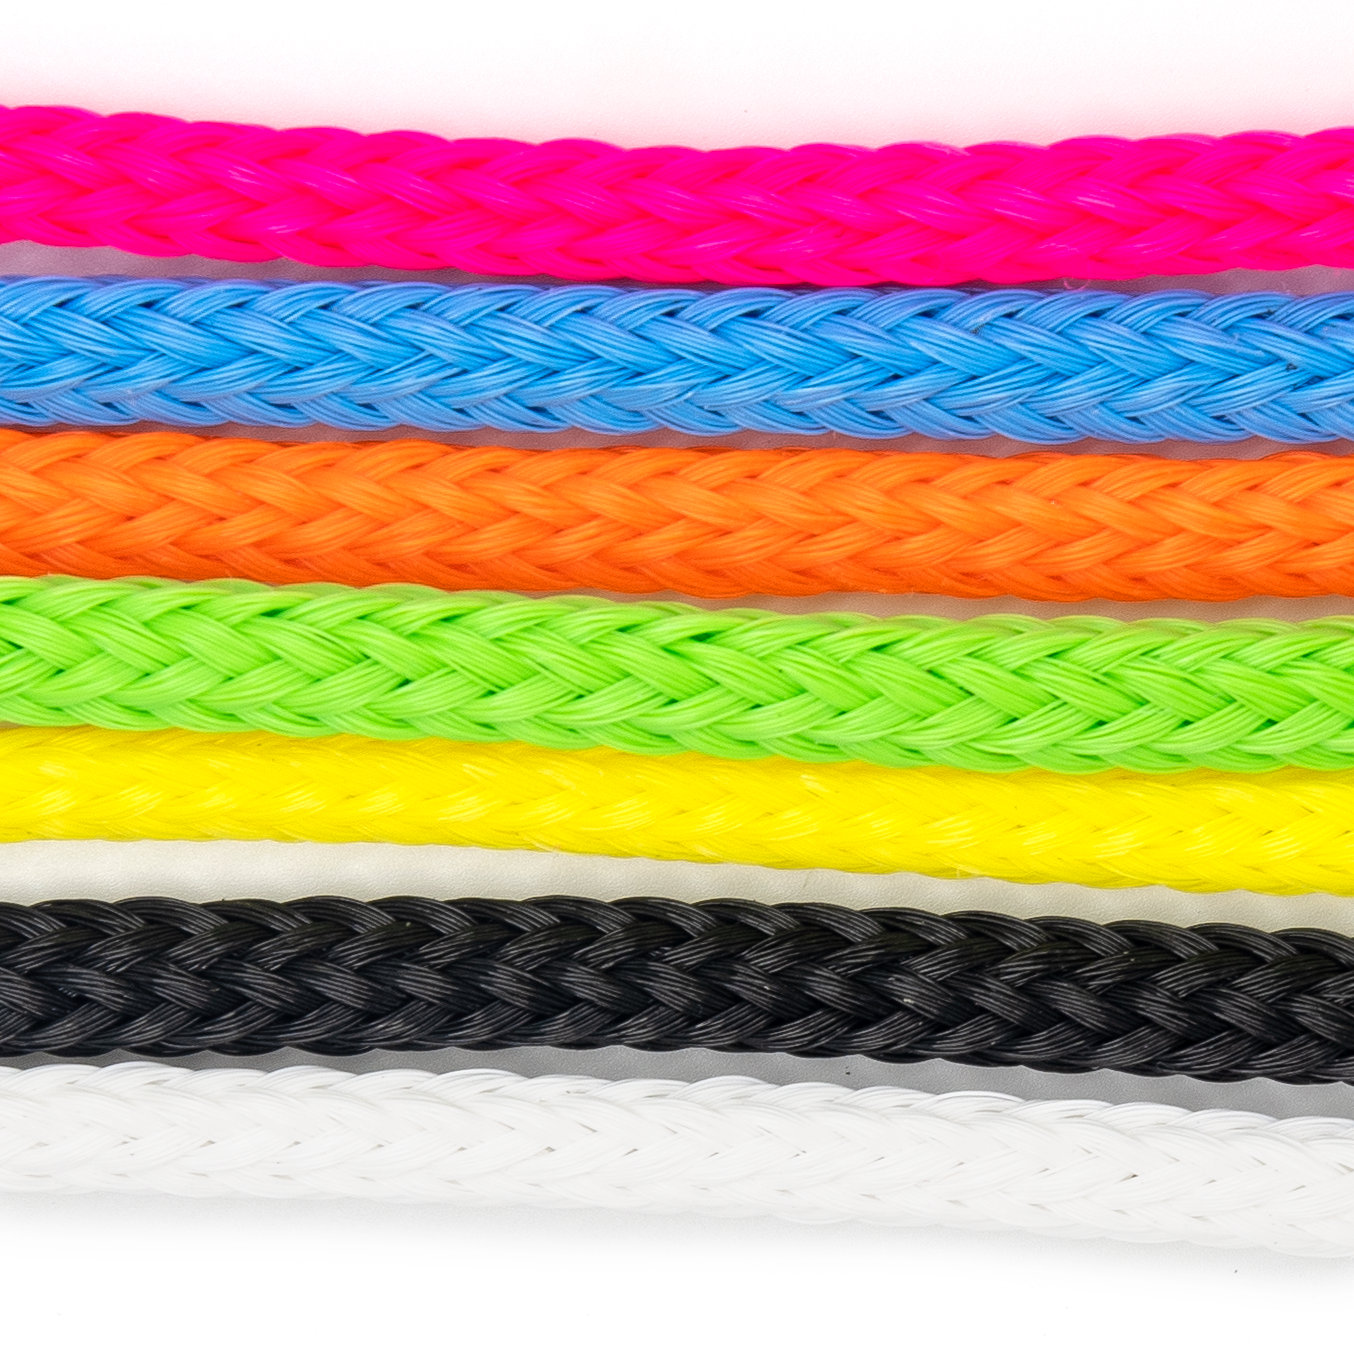 8MM (HDPE) Poly-Ethylene Bulk Rope - Solid Colors Sold by the Box -  Masterline